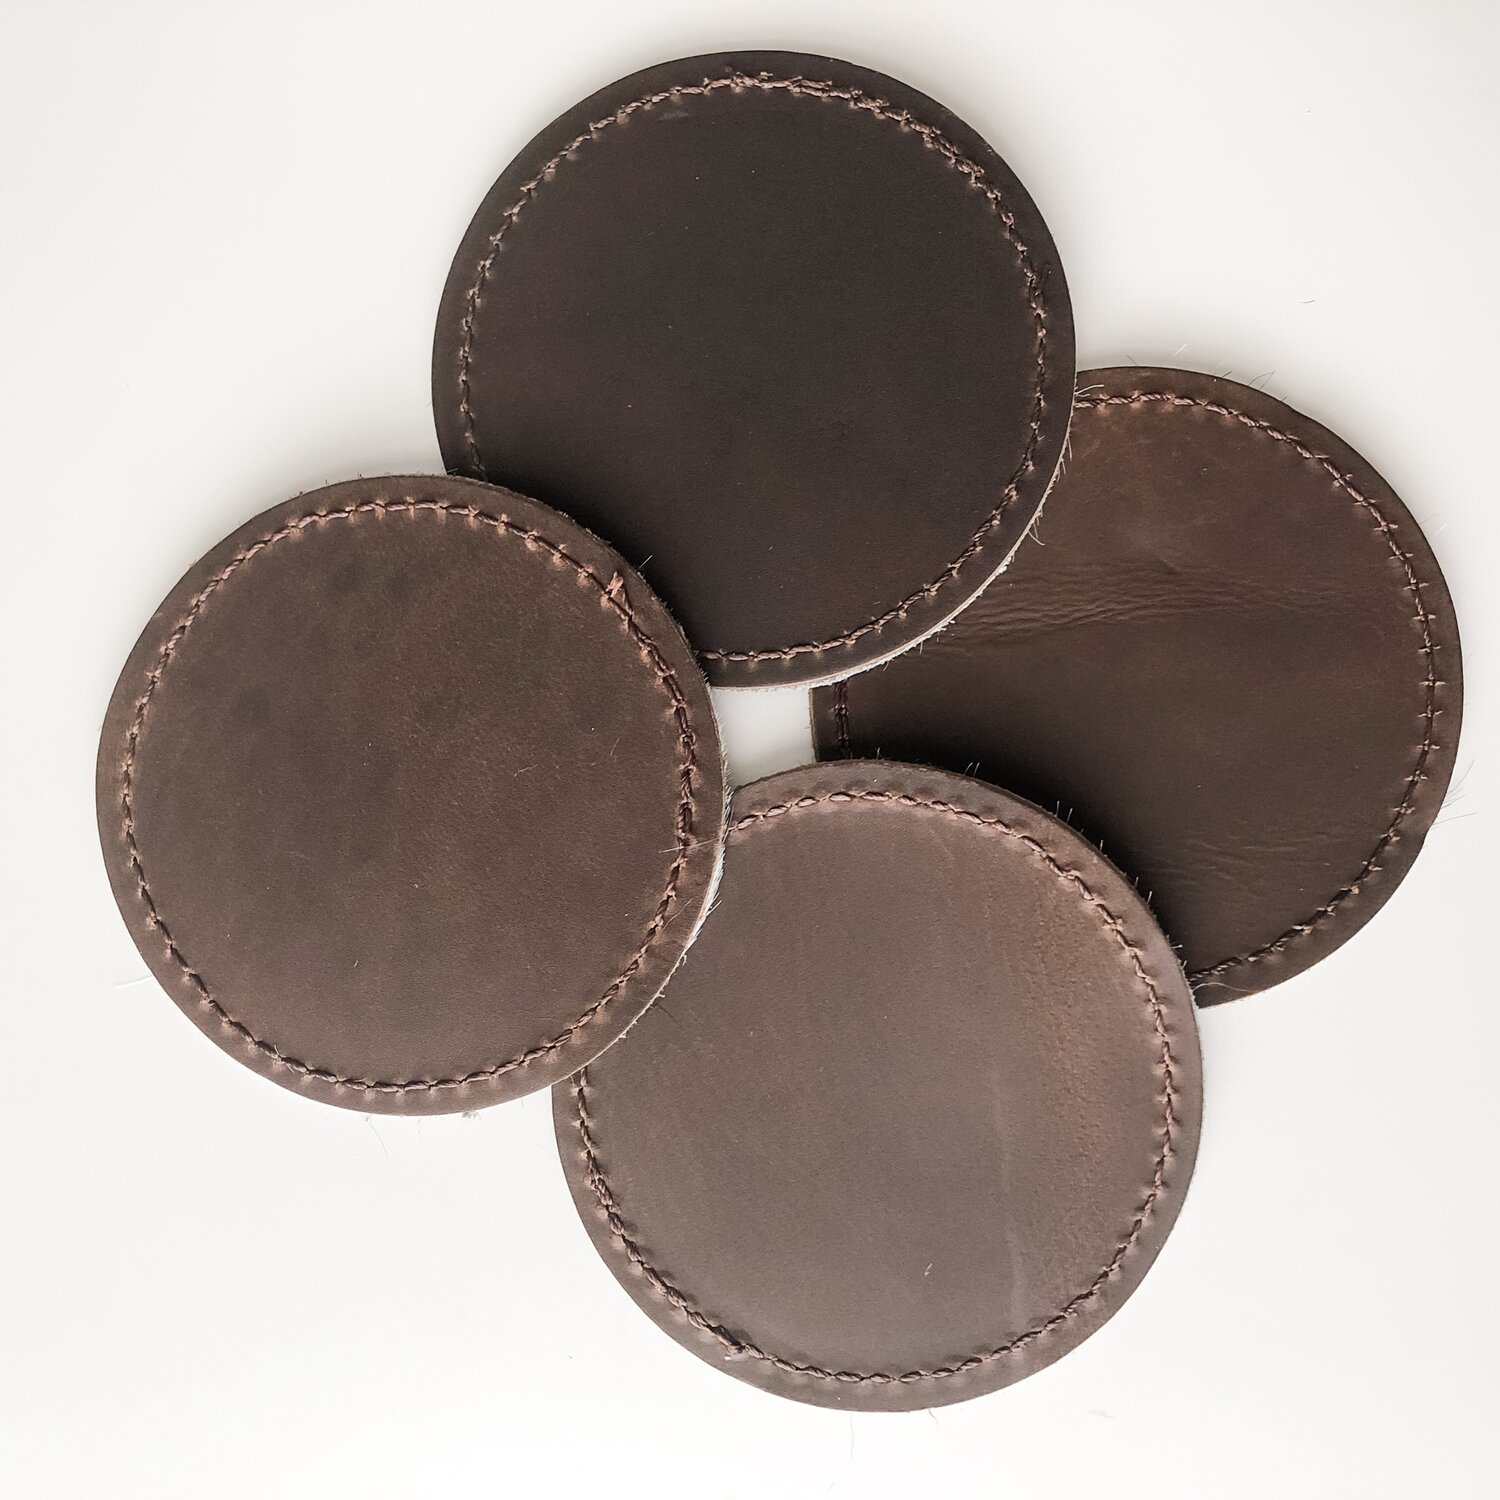 RODEO Cowhide Coasters - Handmade Leather Cowhide Coasters for Drinks -  Western Coasters Style - 2 Layers, Hair On & Leather Back, Easy to Clean 